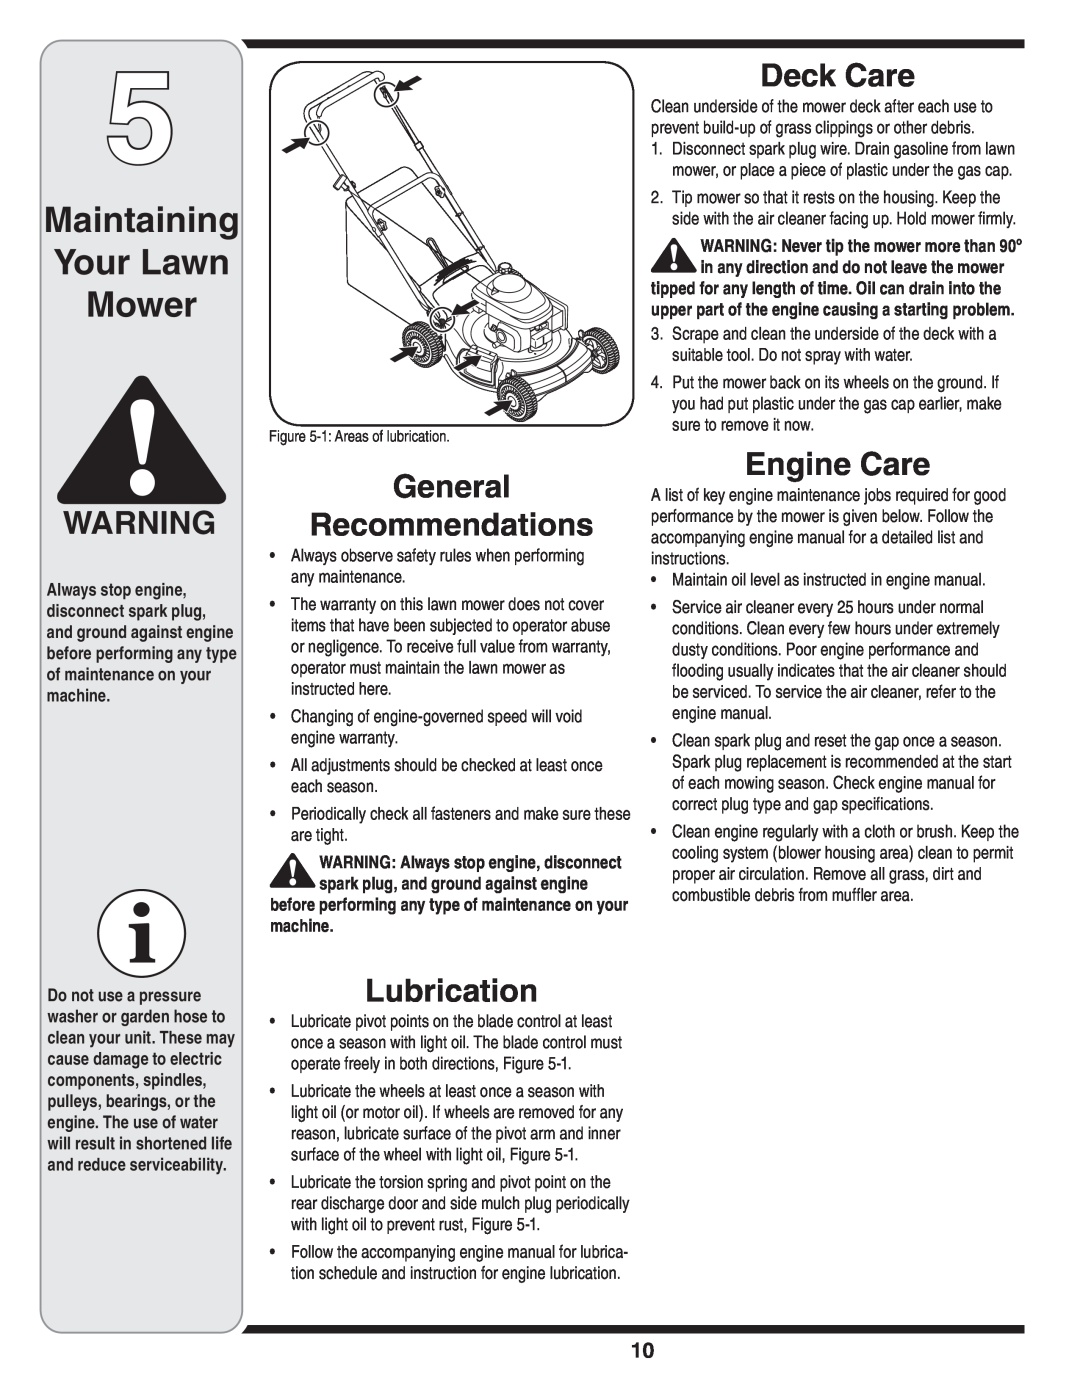 Cub Cadet 439 warranty Maintaining Your Lawn Mower, General Recommendations, Lubrication, Deck Care, Engine Care 